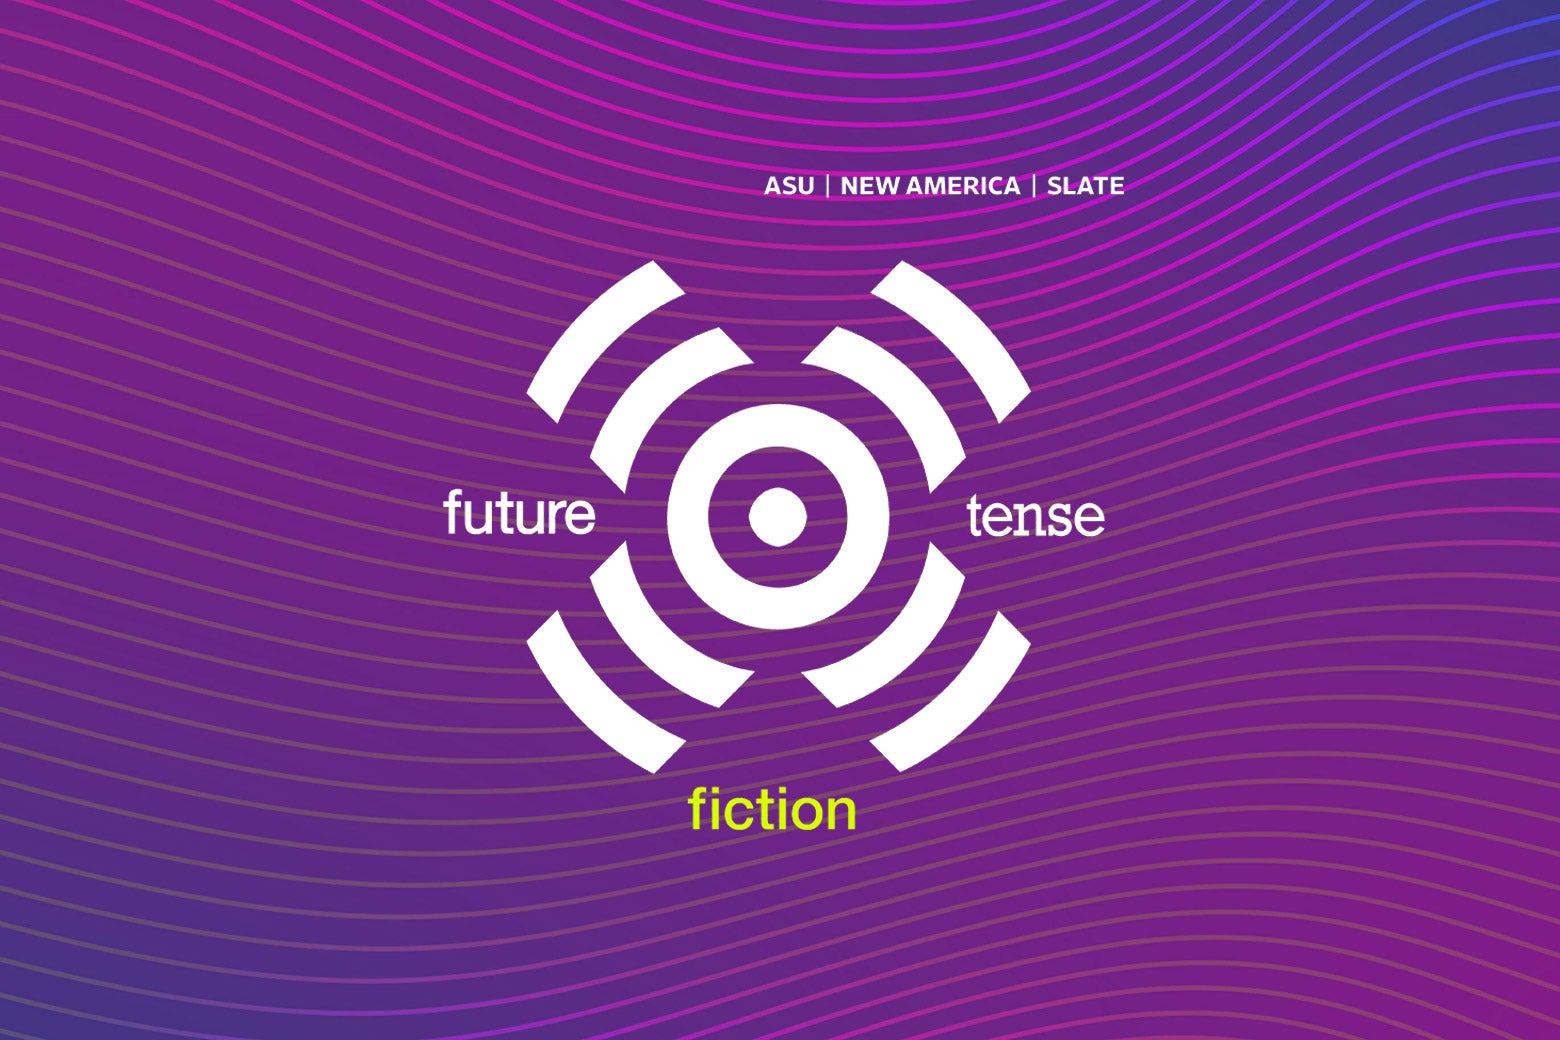 The Future Tense logo (a white target that evokes a satellite) against a purple background and the words "Future Tense Fiction."